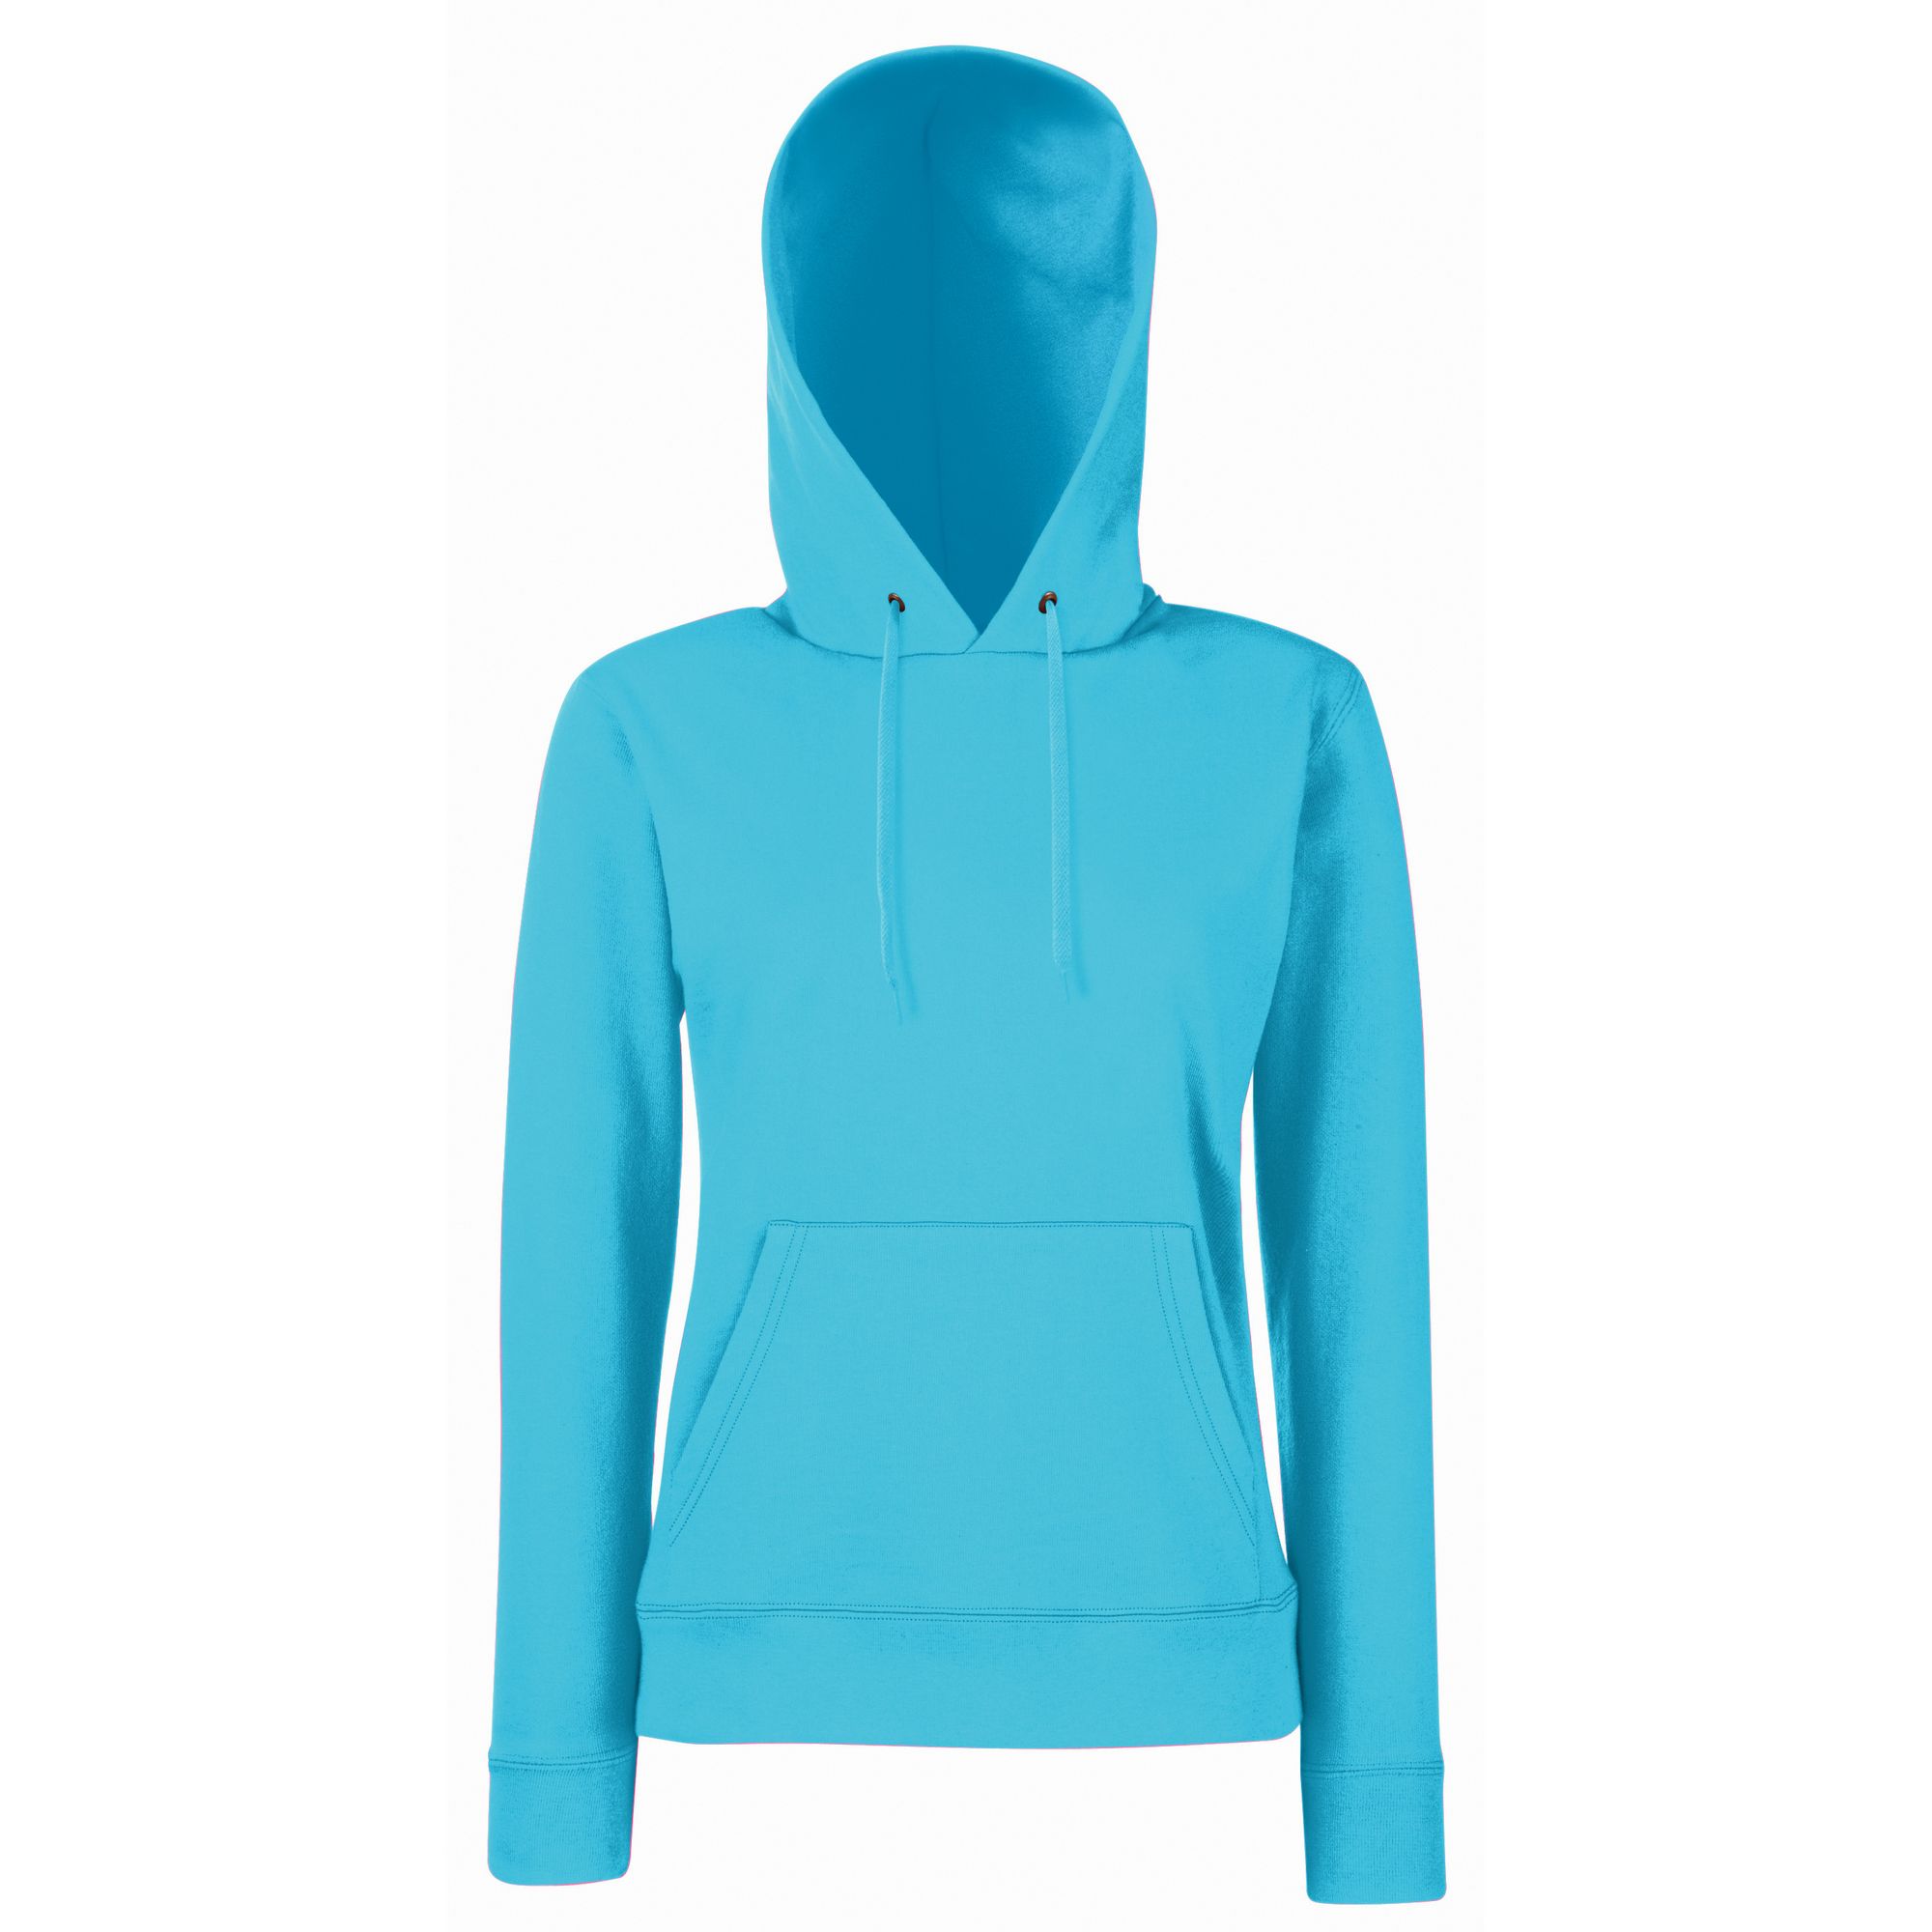 Double fabric hood with self-coloured draw cord. Front pouch pocket. Waist and cuff rib in cotton/Lycra® for shape retention. Shaped side seams for a more feminine fit. Produced using Belcoro® yarn for a softer feel and cleaner printing process. Weight: 280g/m². Fabric: 80% Cotton Belcoro® Yarn, 20% Polyester. XS (8: Dress Size). S (10: Dress Size). M (12: Dress Size). L (14: Dress Size). XL (16: Dress Size). 2XL (18: Dress Size). <BR><BR>FRUIT OF THE LOOM - a brand steeped in tradition, offering a comprehensive range of garments.